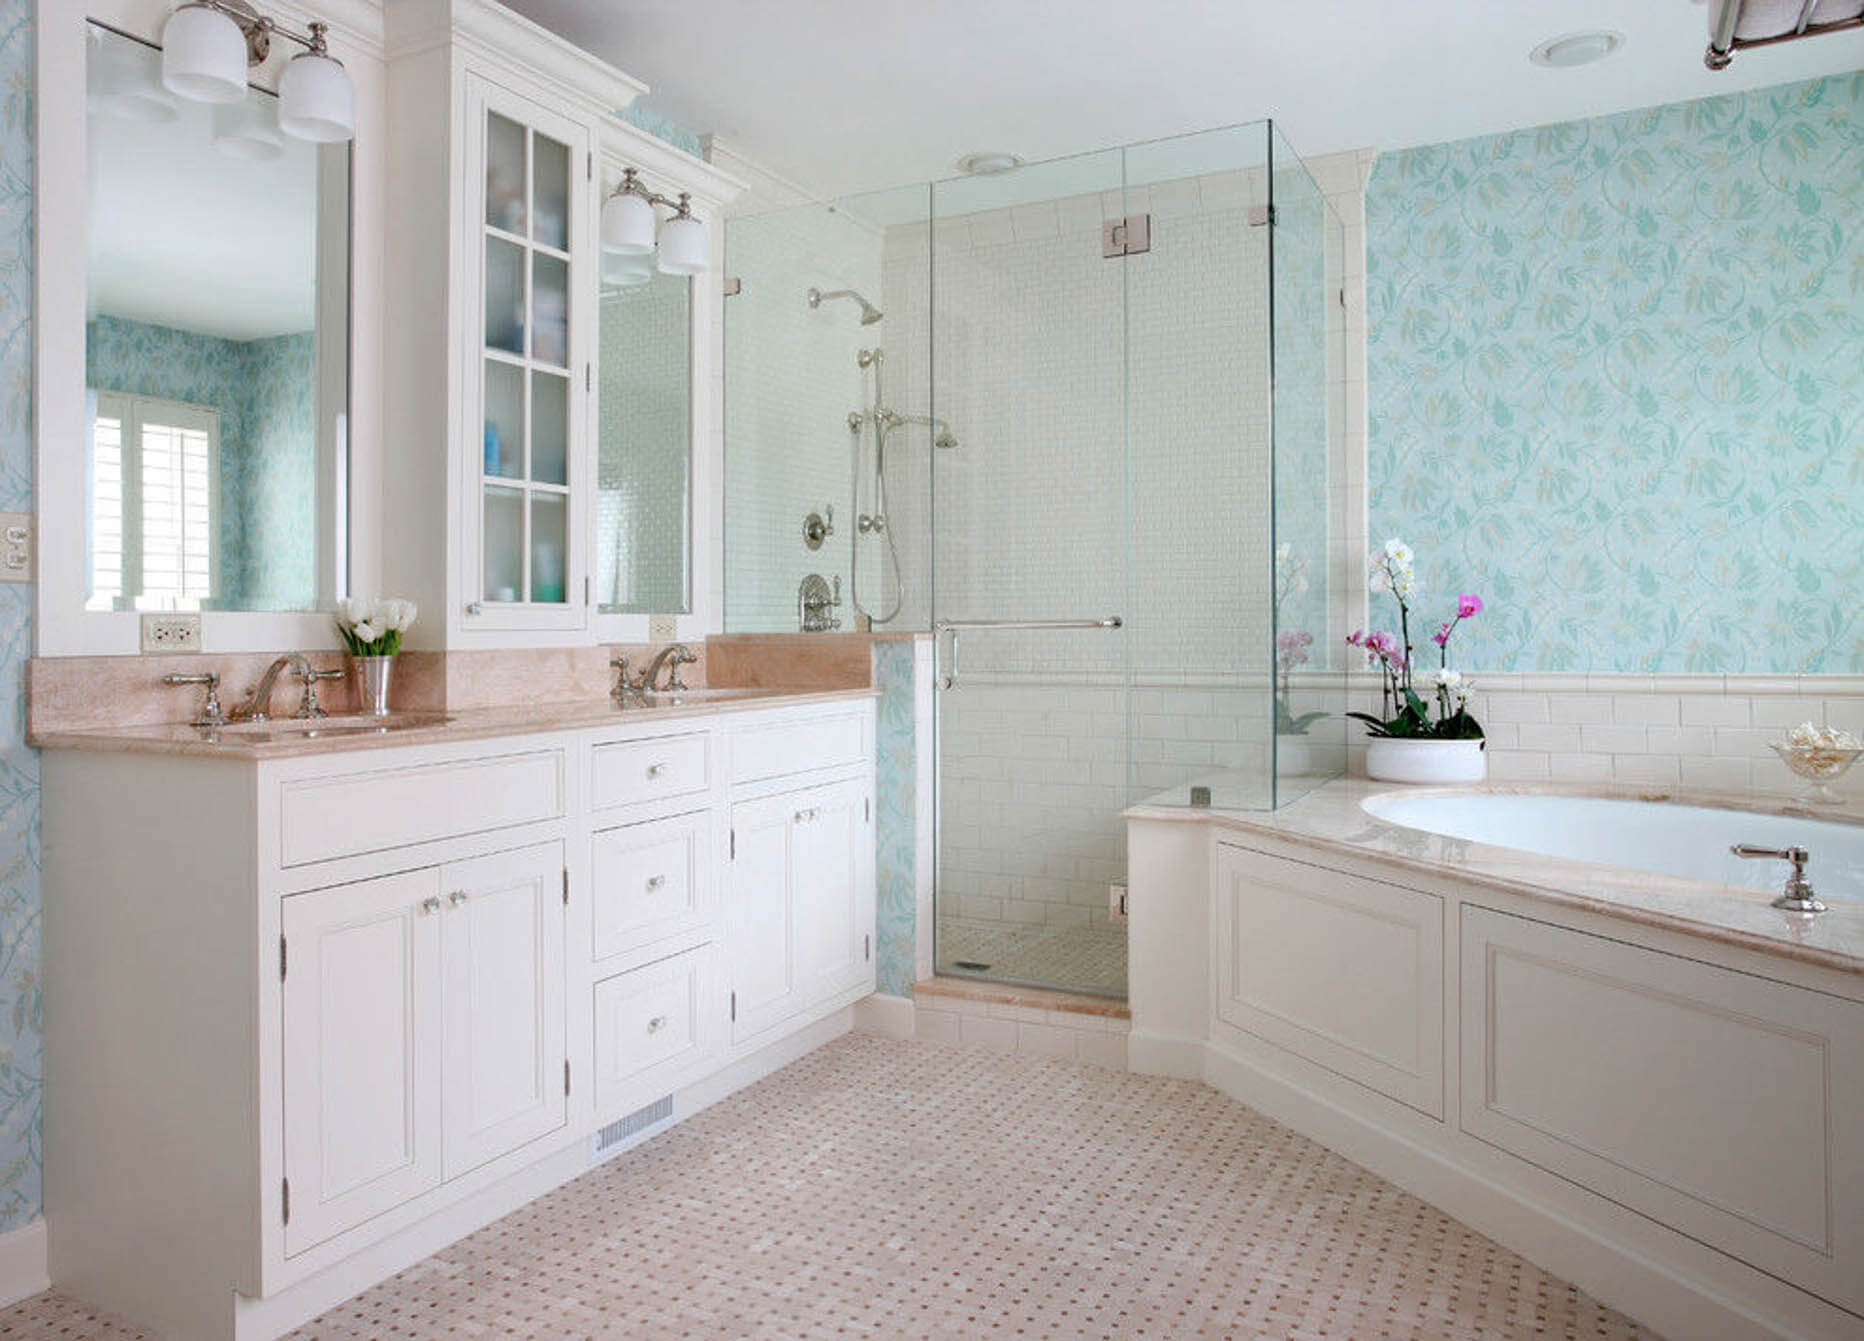 cleanly remodeled bathroom with glass shower door, soaking, tub and custom shelving. The cabinets and walls are light colors.